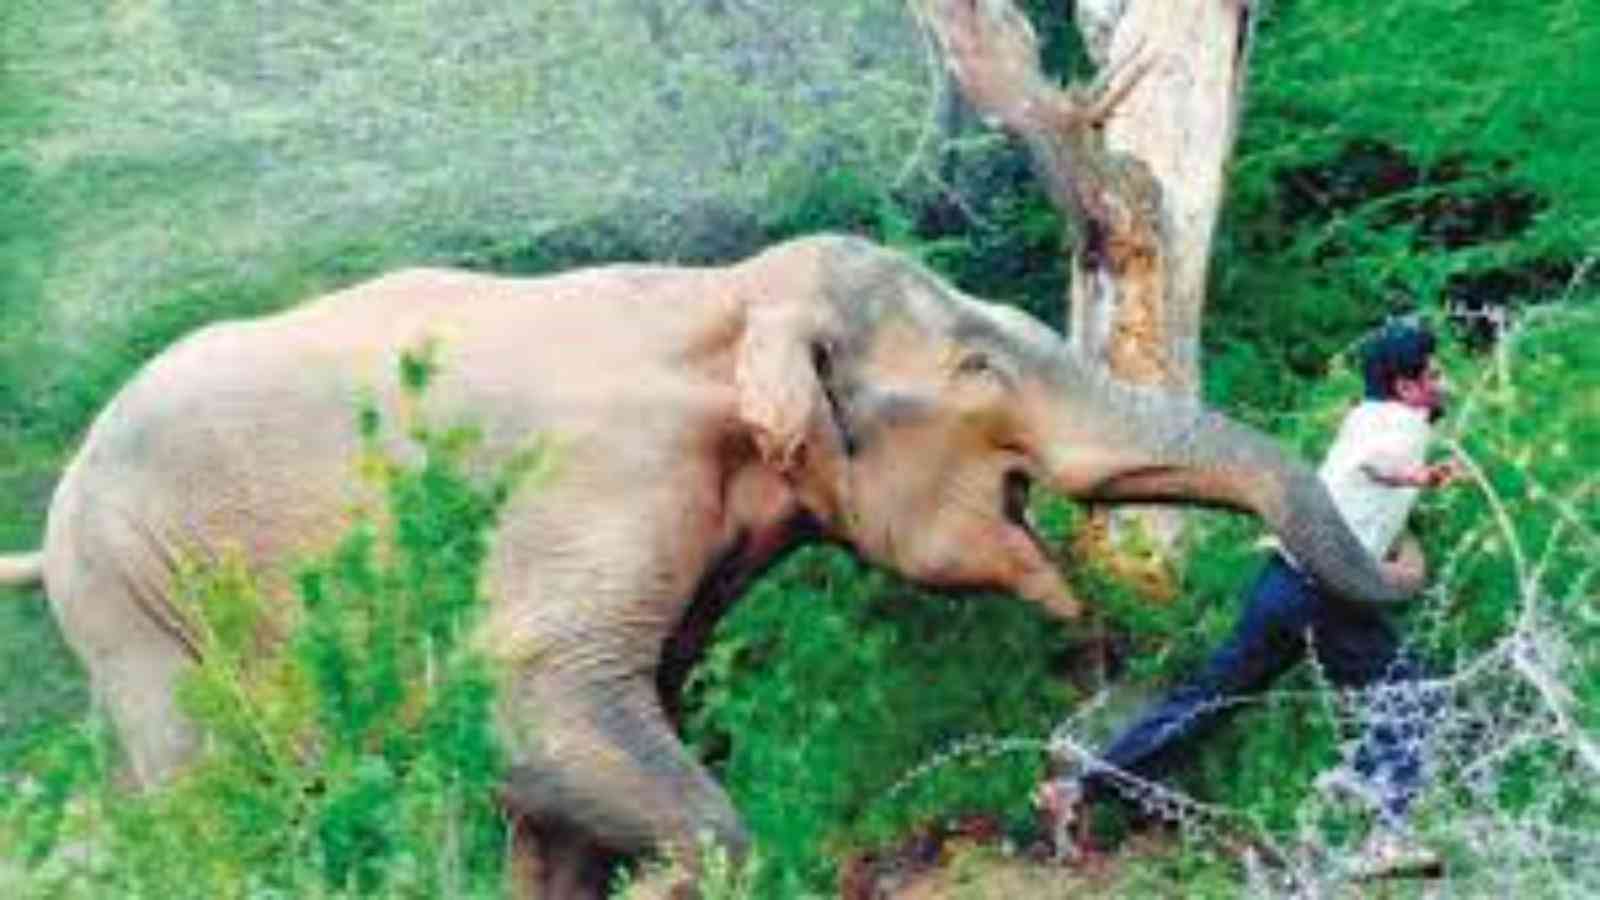 Increasing man-animal conflict in Kerala's forests sends wrong message:  Forest official